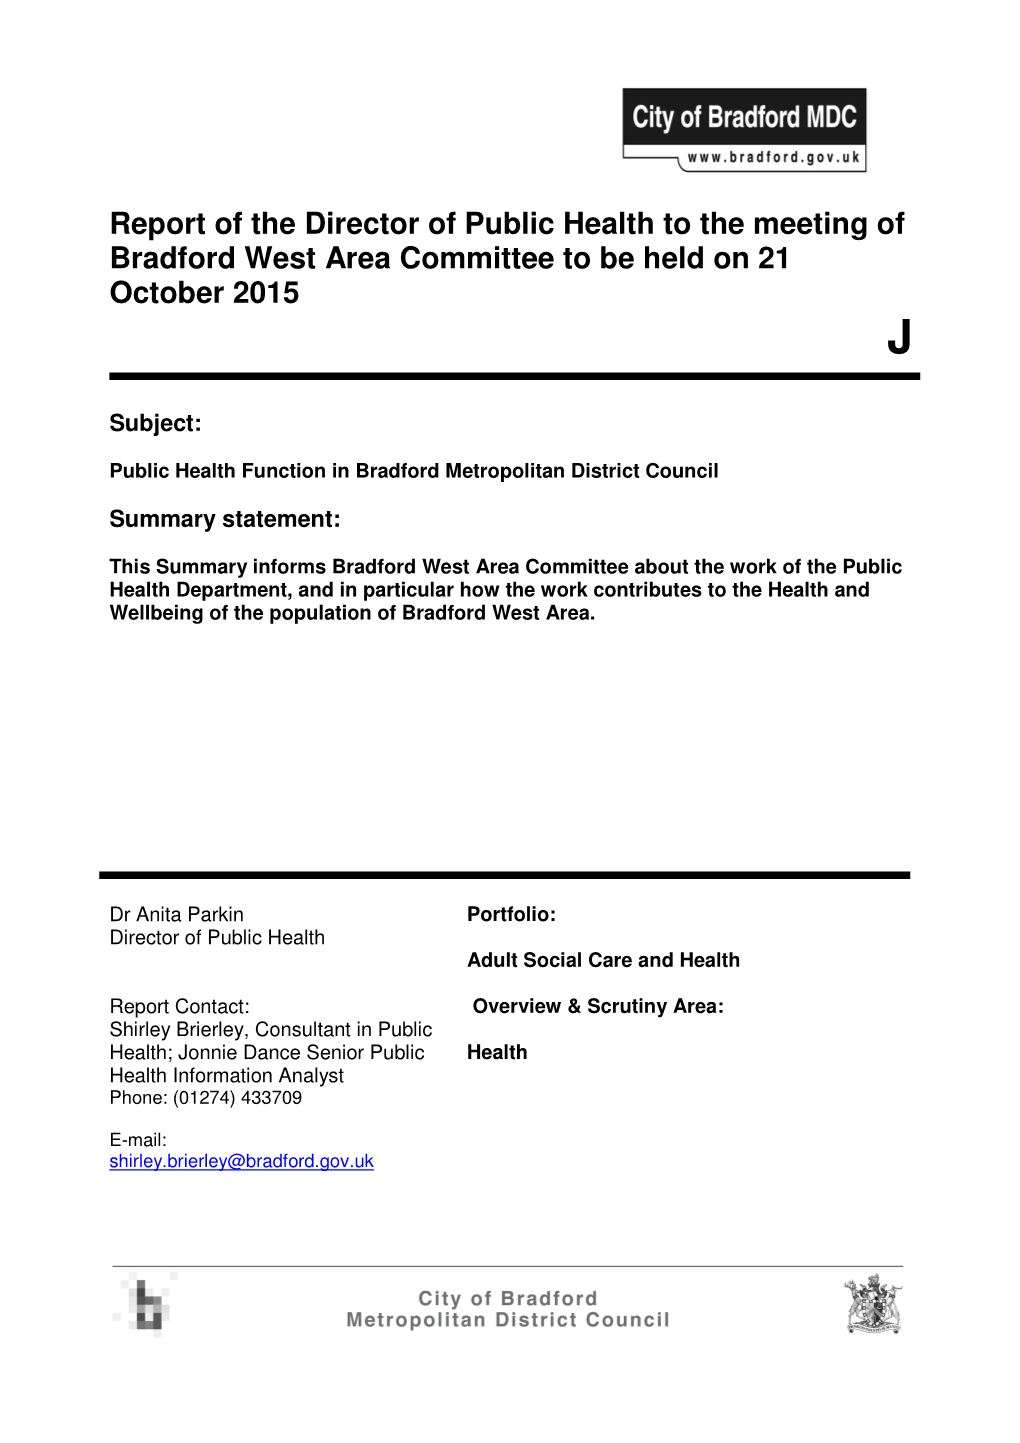 Report of the Director of Public Health to the Meeting of Bradford West Area Committee to Be Held on 21 October 2015 J